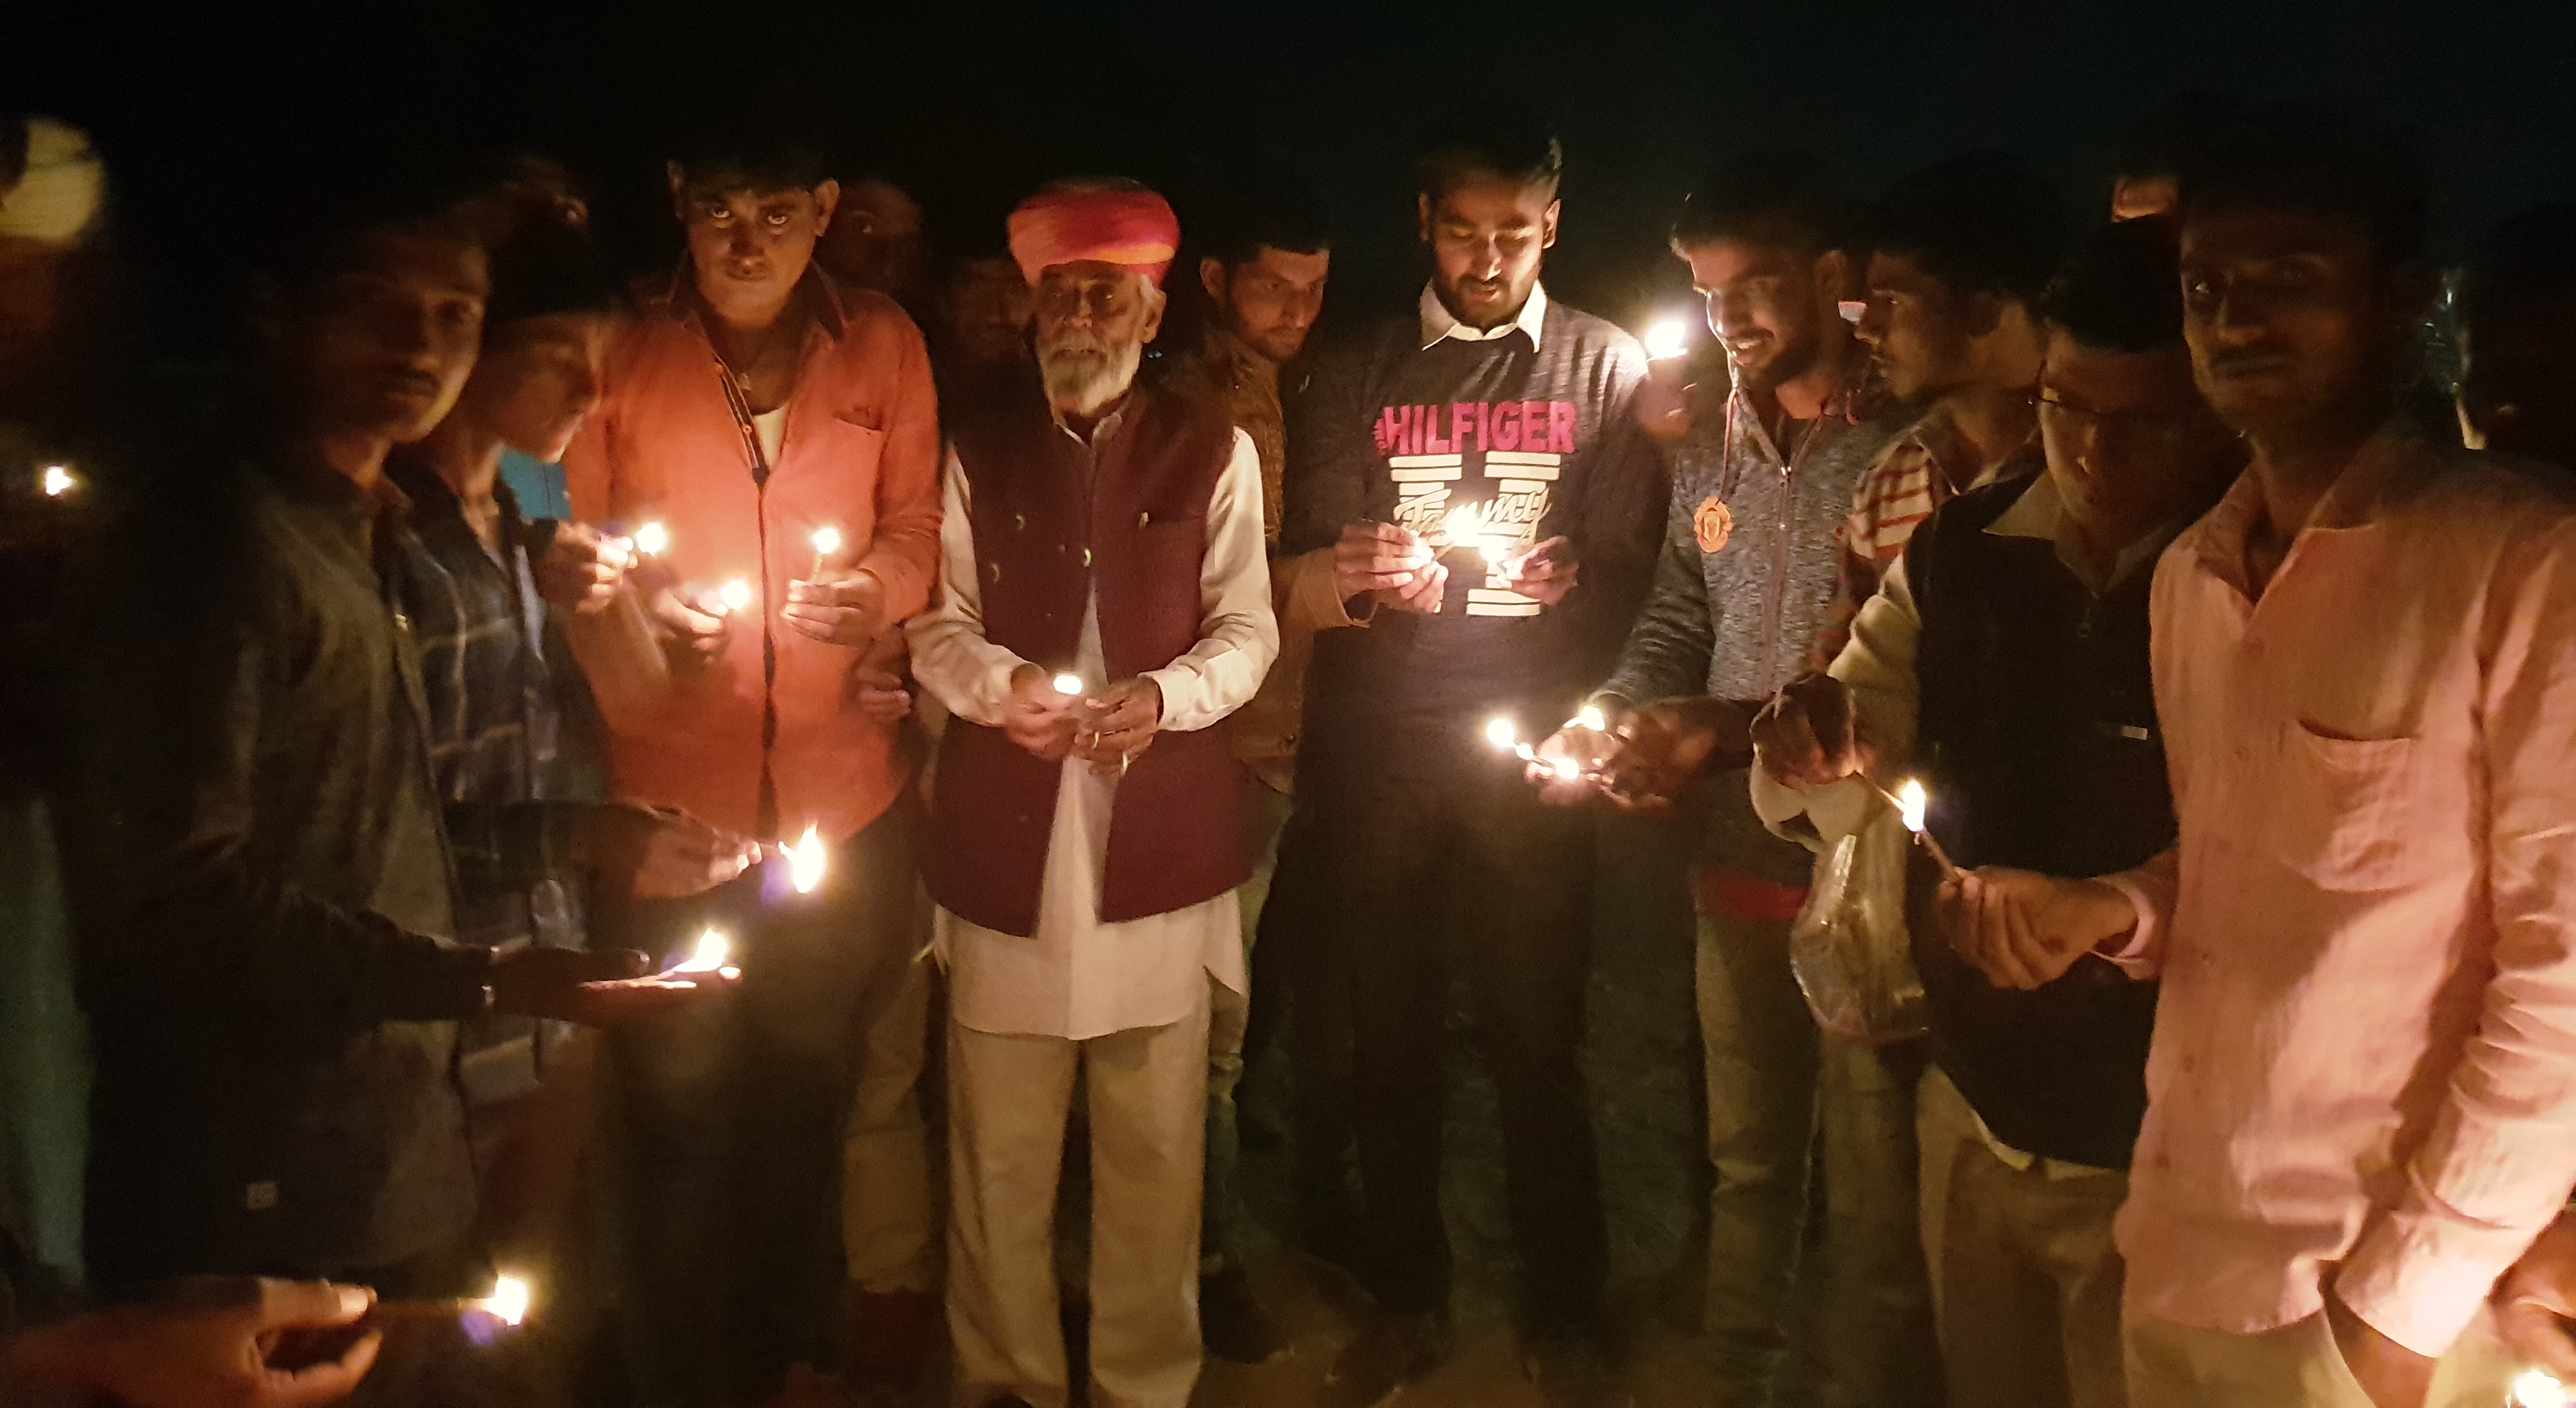 Candle march news